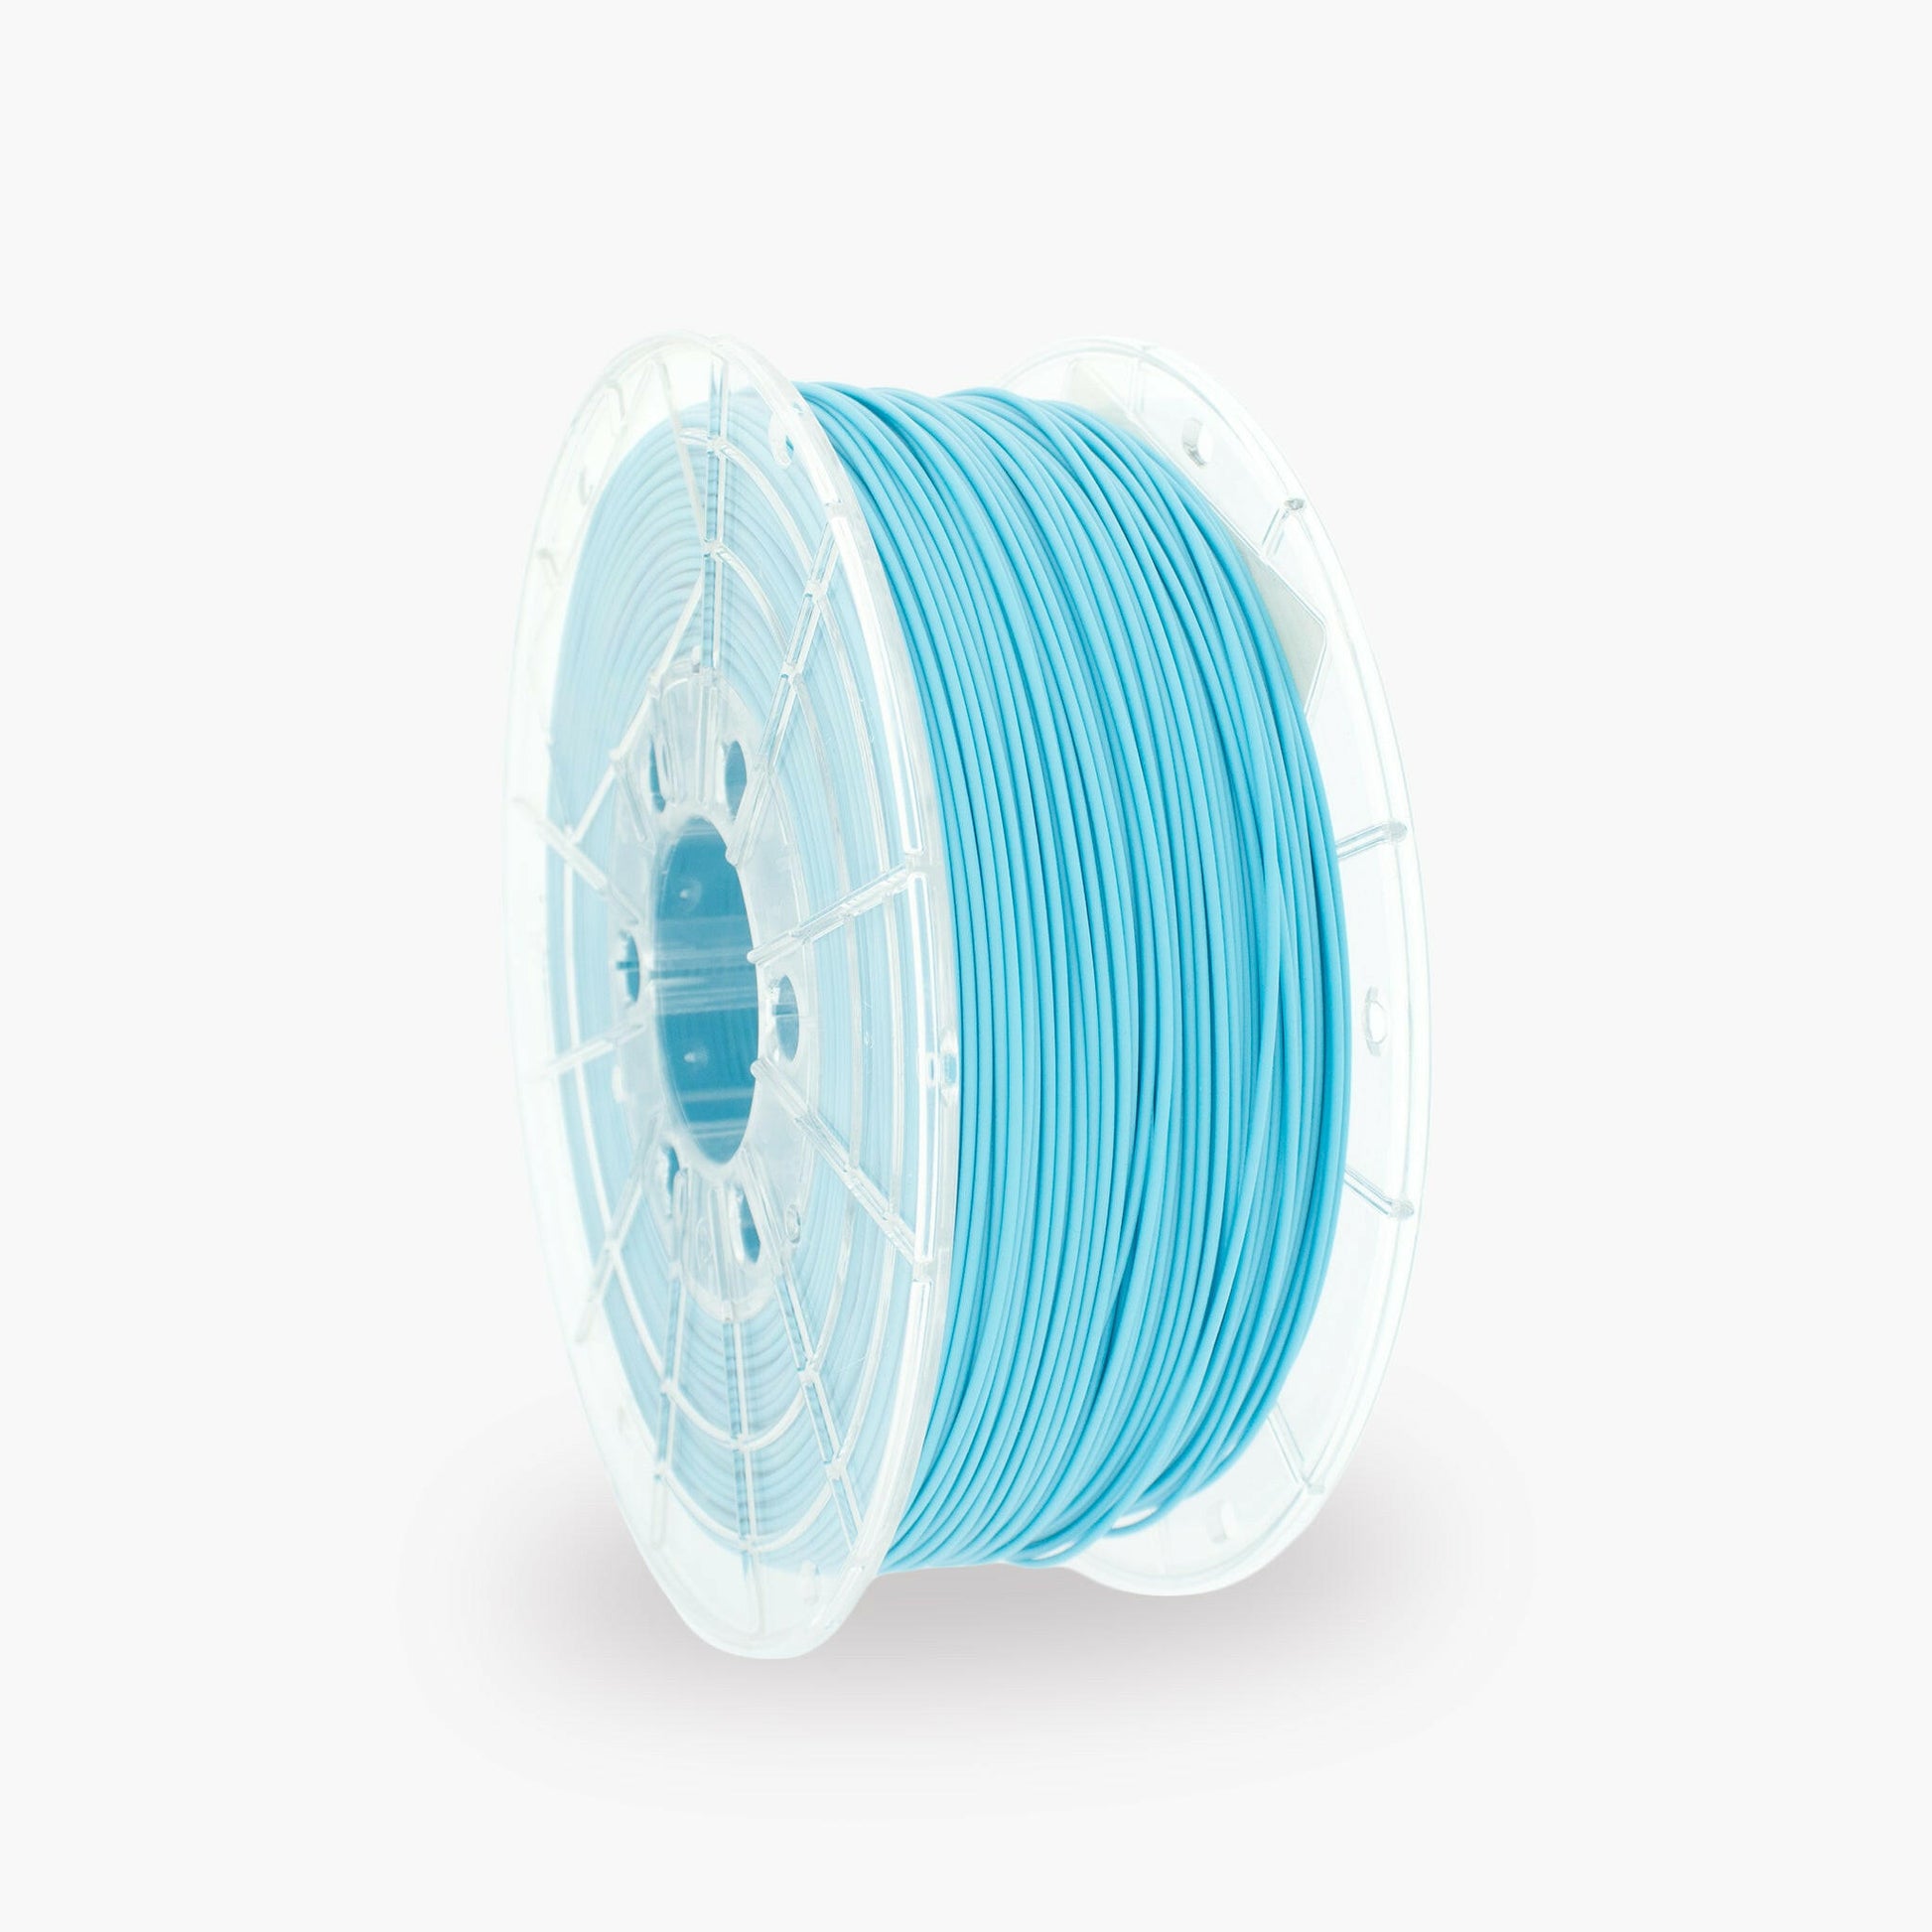 Light Blue PLA 3D Printer Filament with a diameter of 1.75mm on a 1KG Spool.